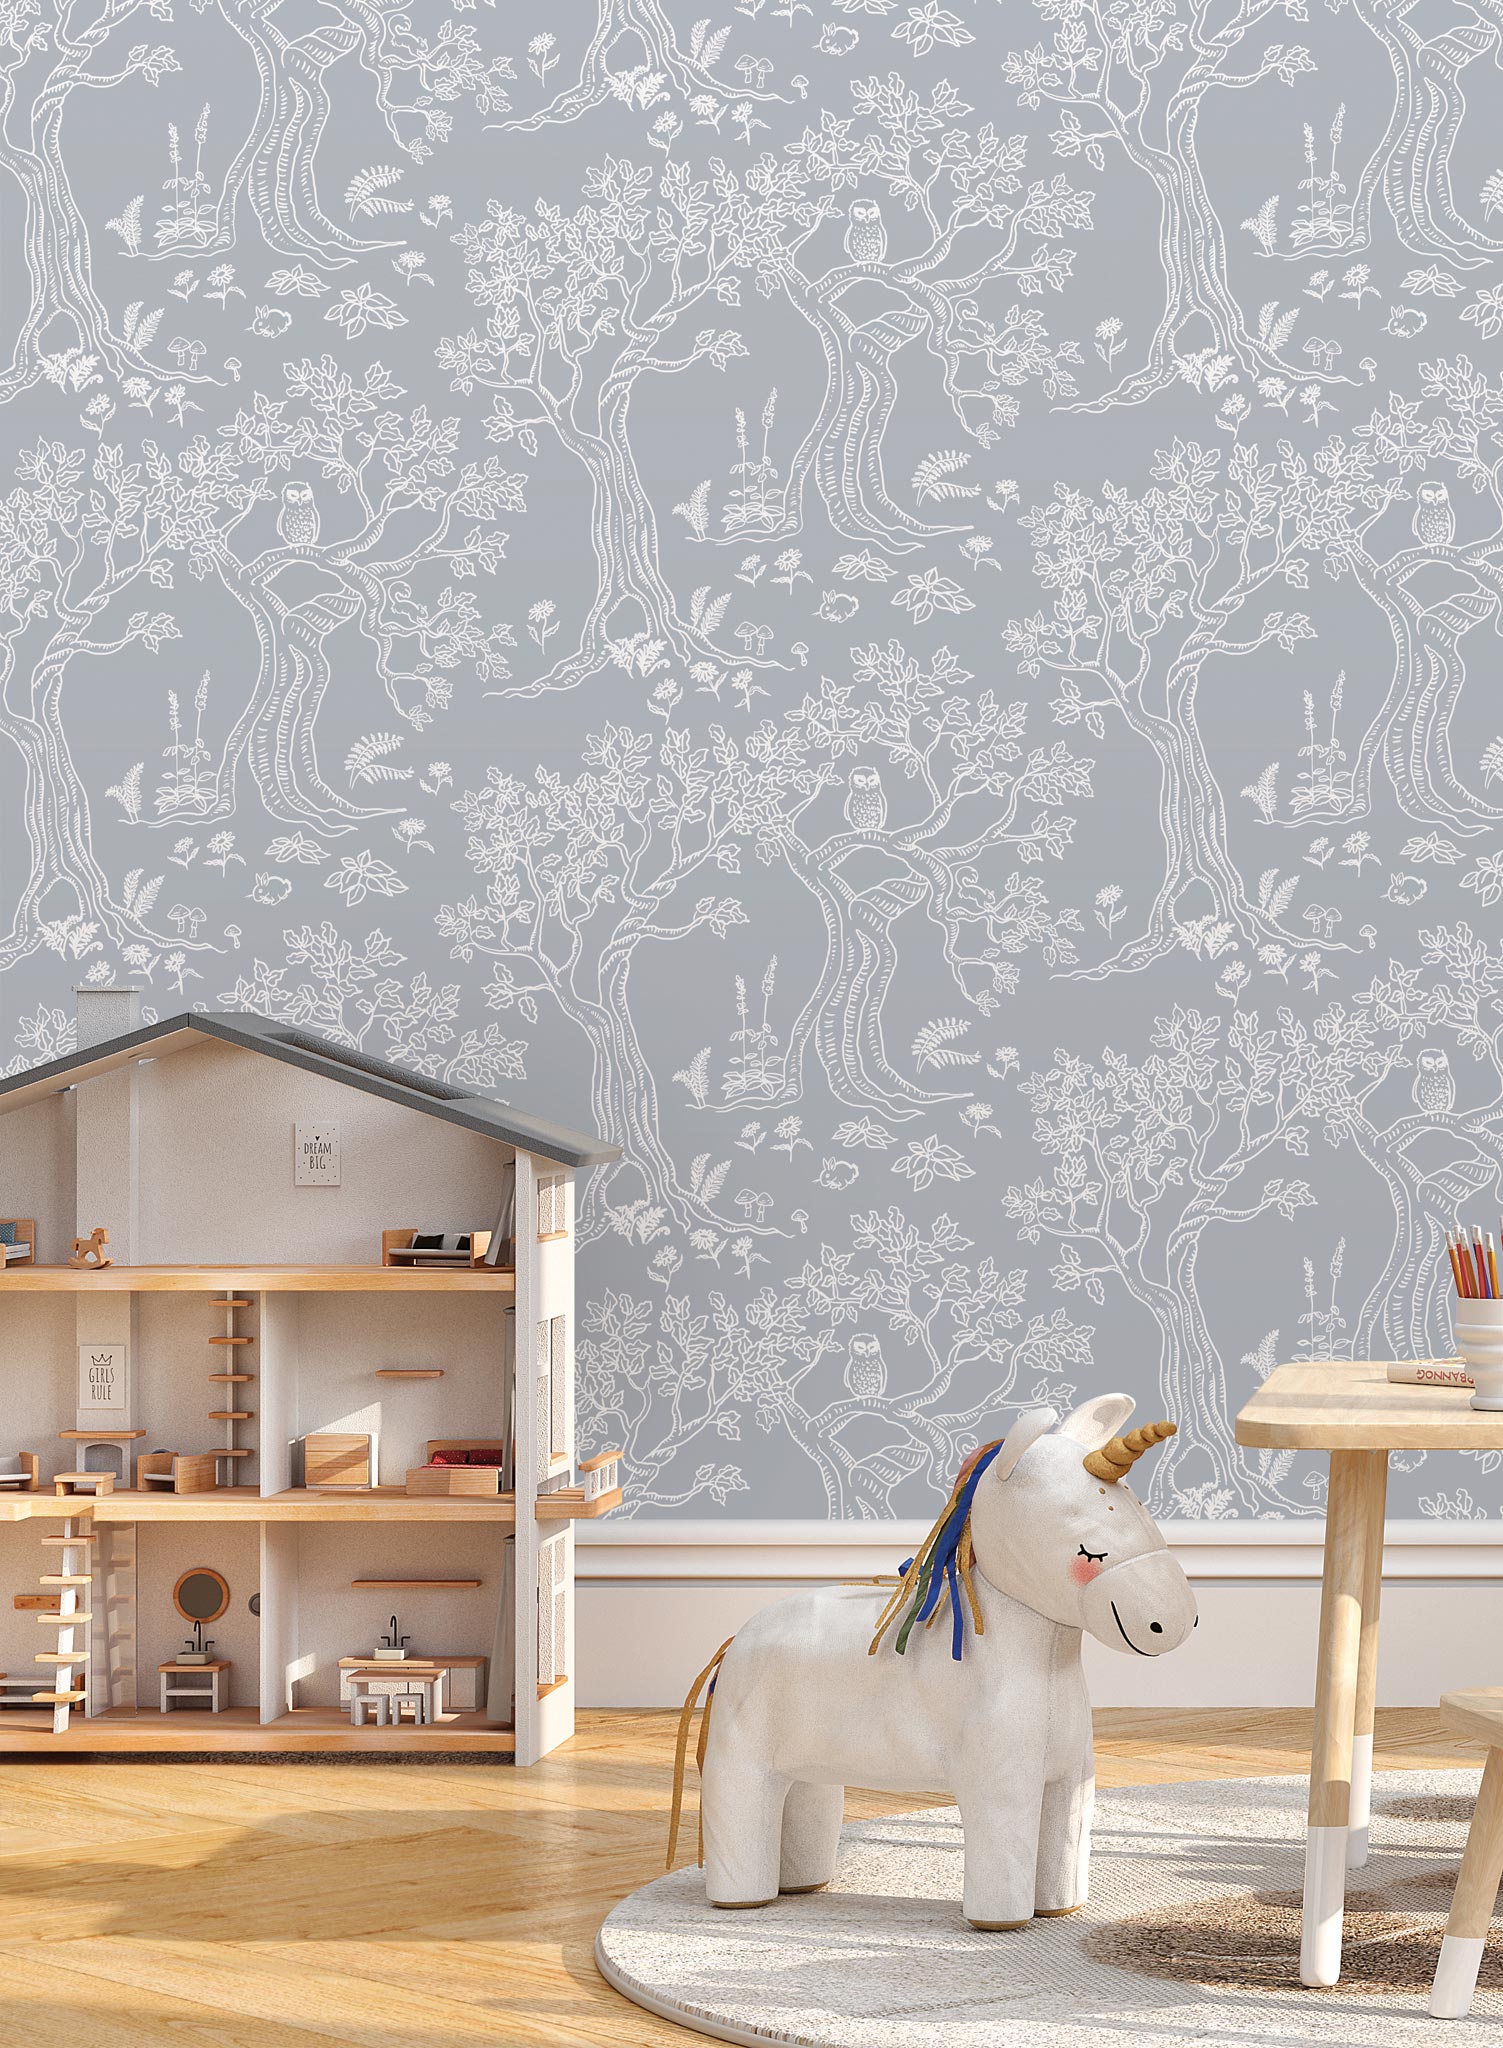 Enchanted is a minimalist wallpaper by Opposite Wall of a enchanted trees